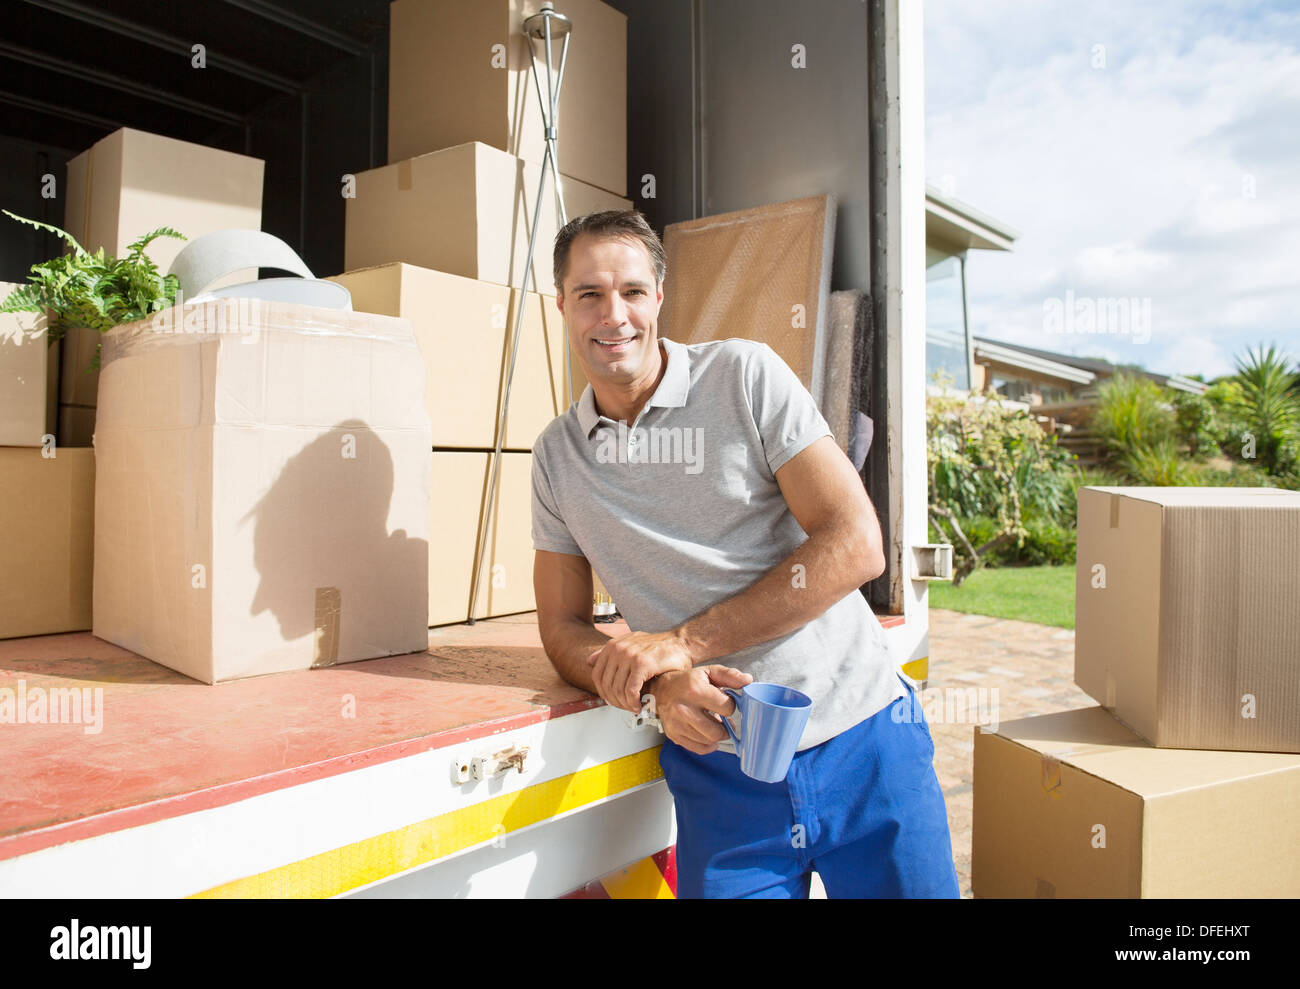 Portrait of man leaning on back of moving van Stock Photo